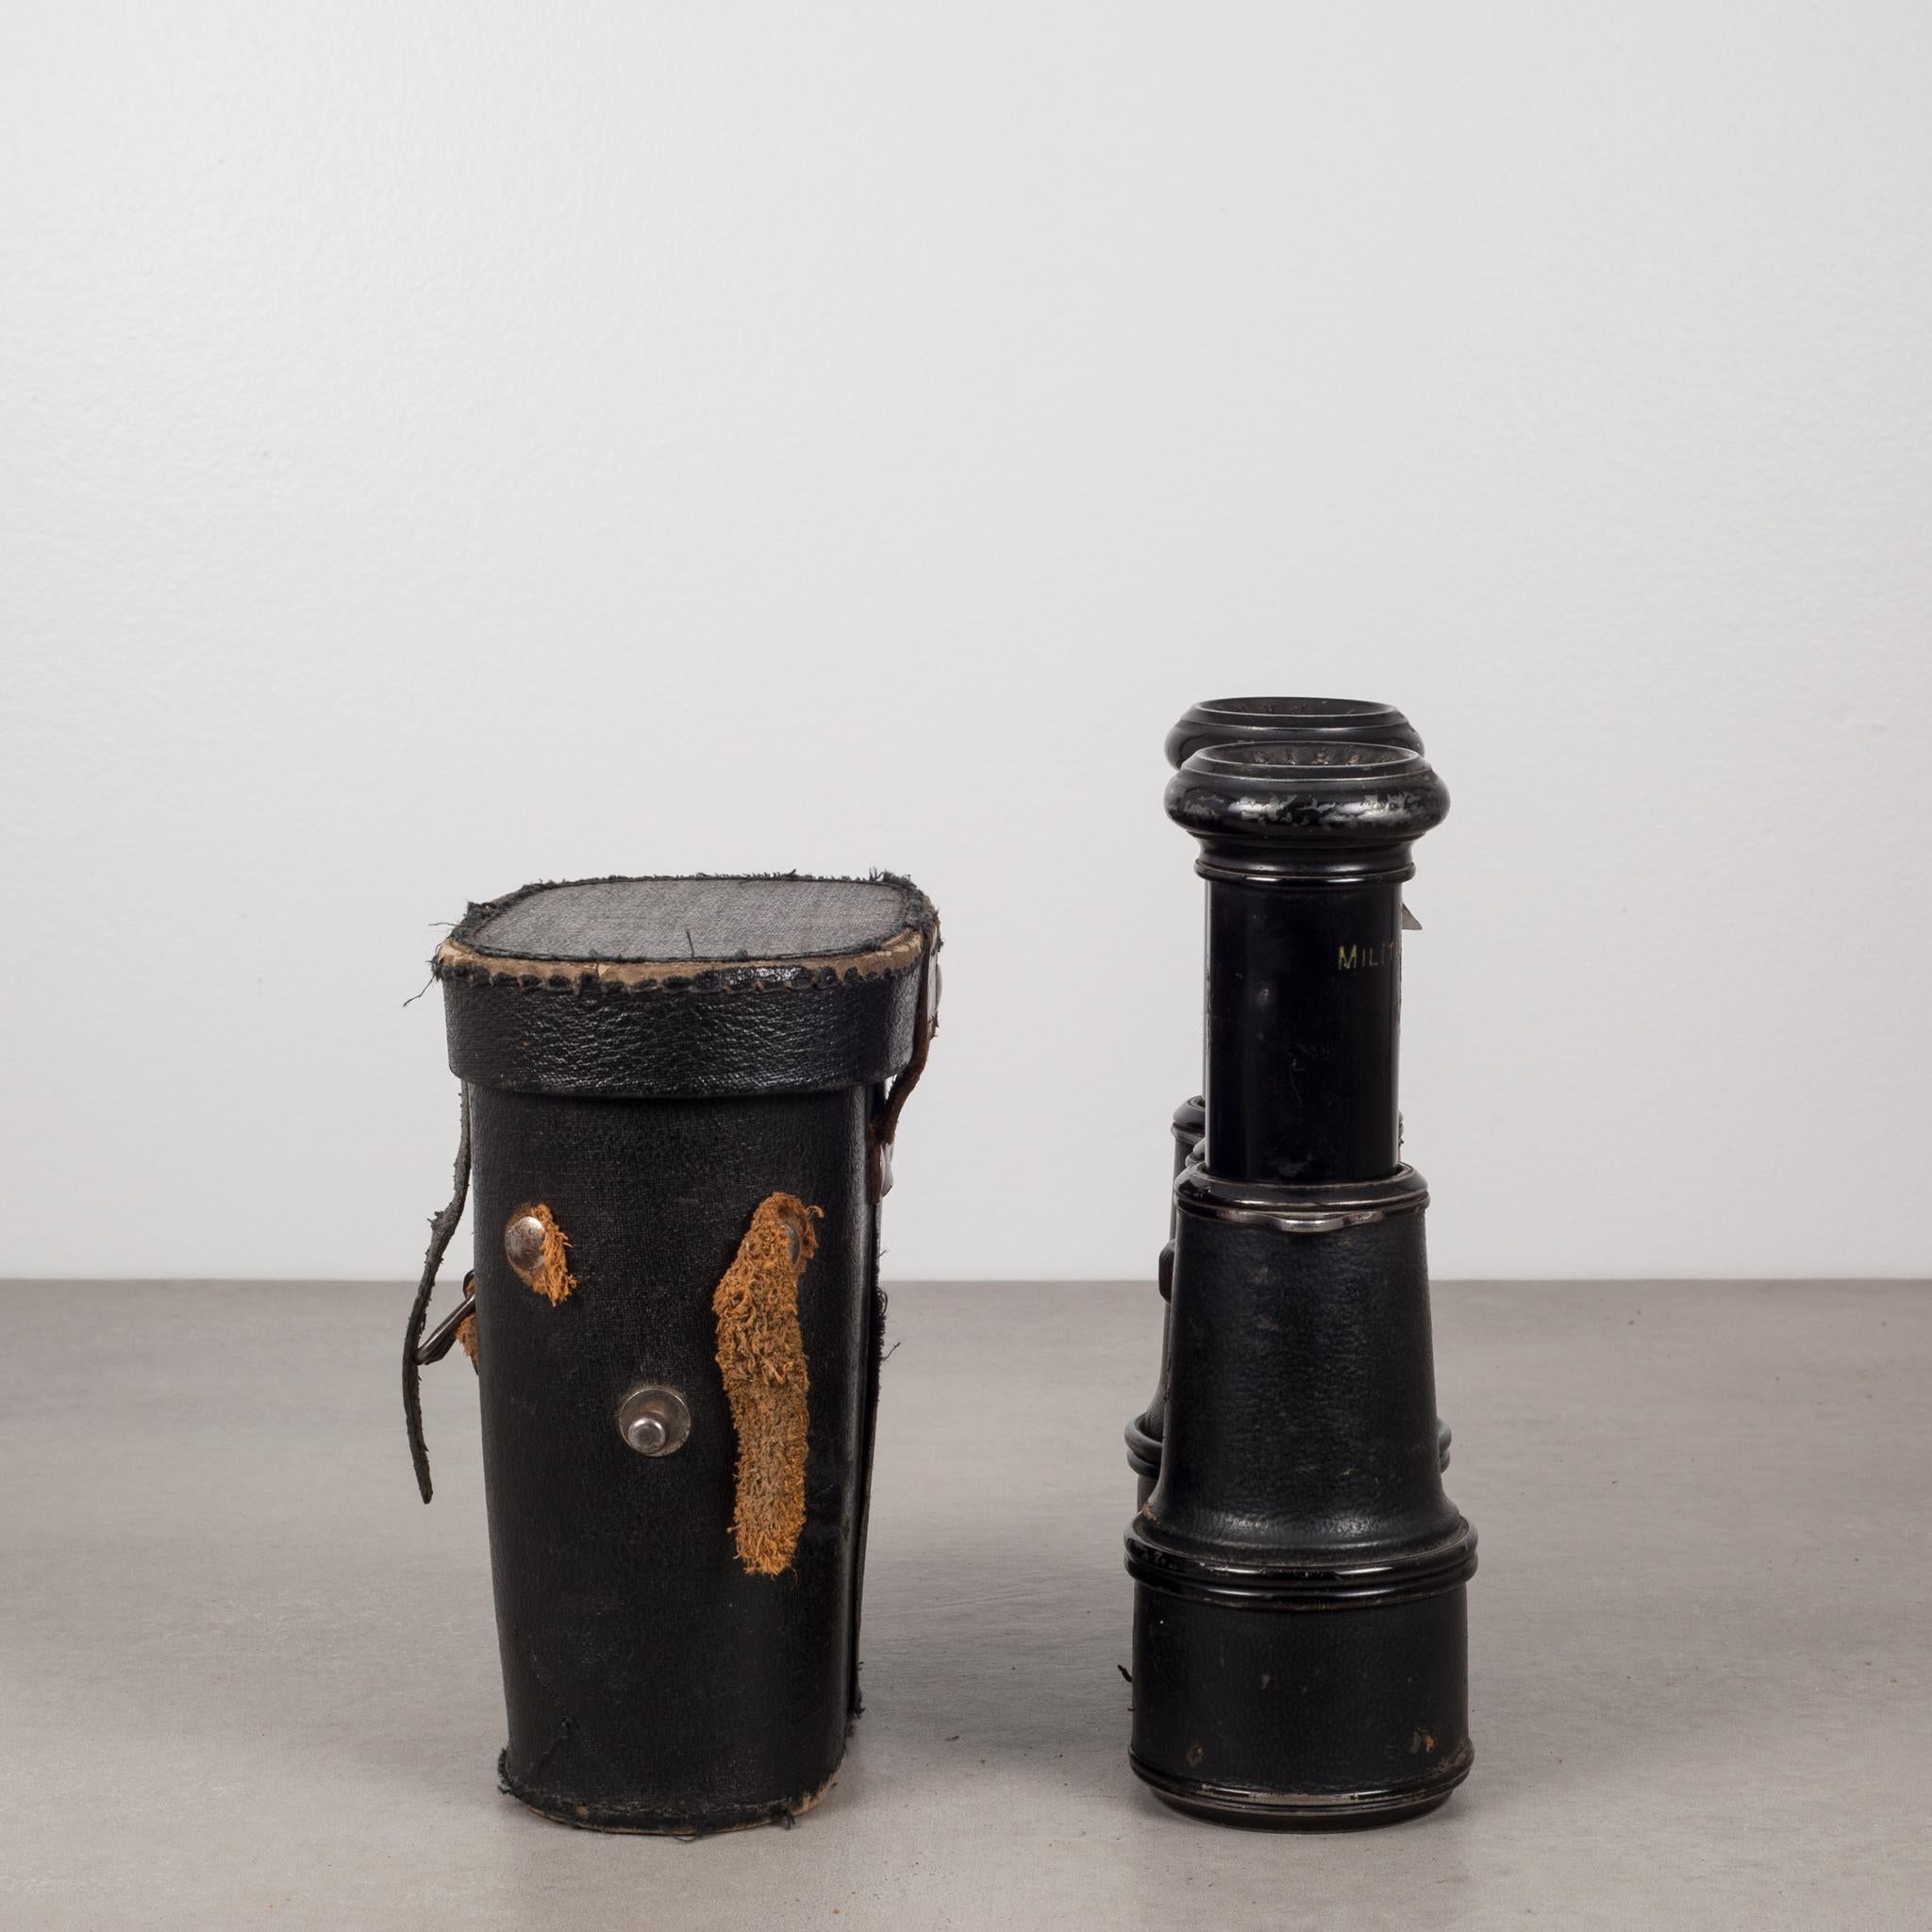 Amazing pair of antique leather wrapped binoculars that have 